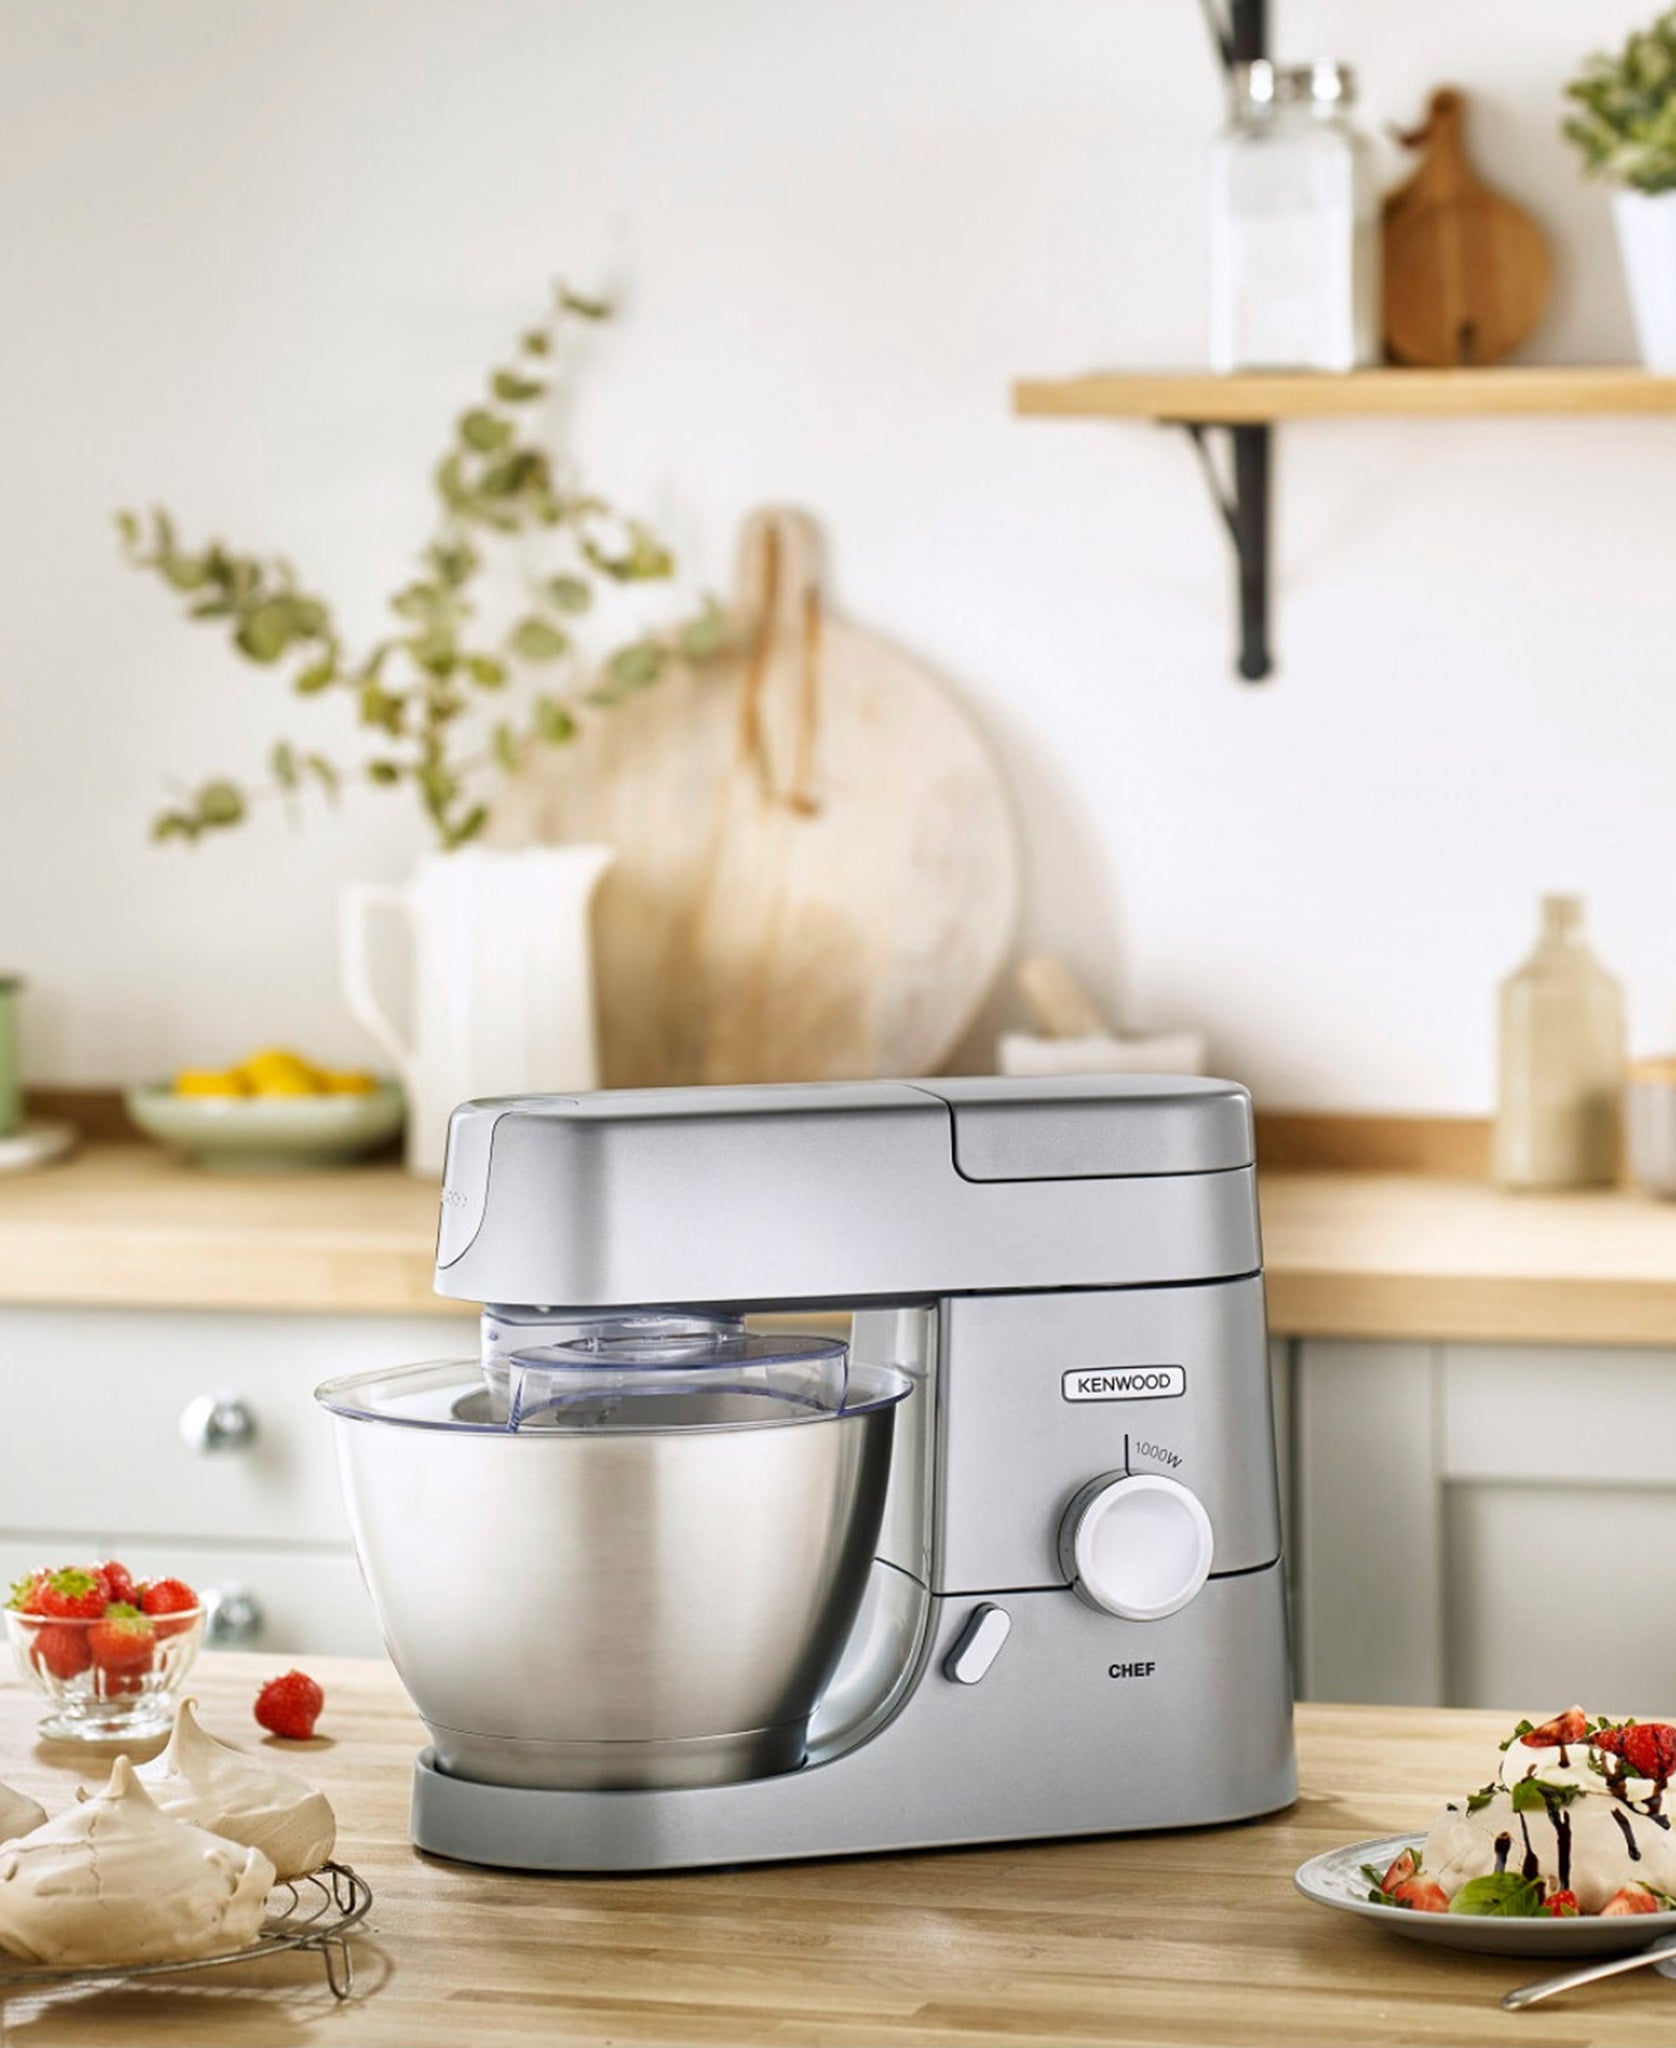 Review: Kenwood KVC3100S Chef Stand Mixer